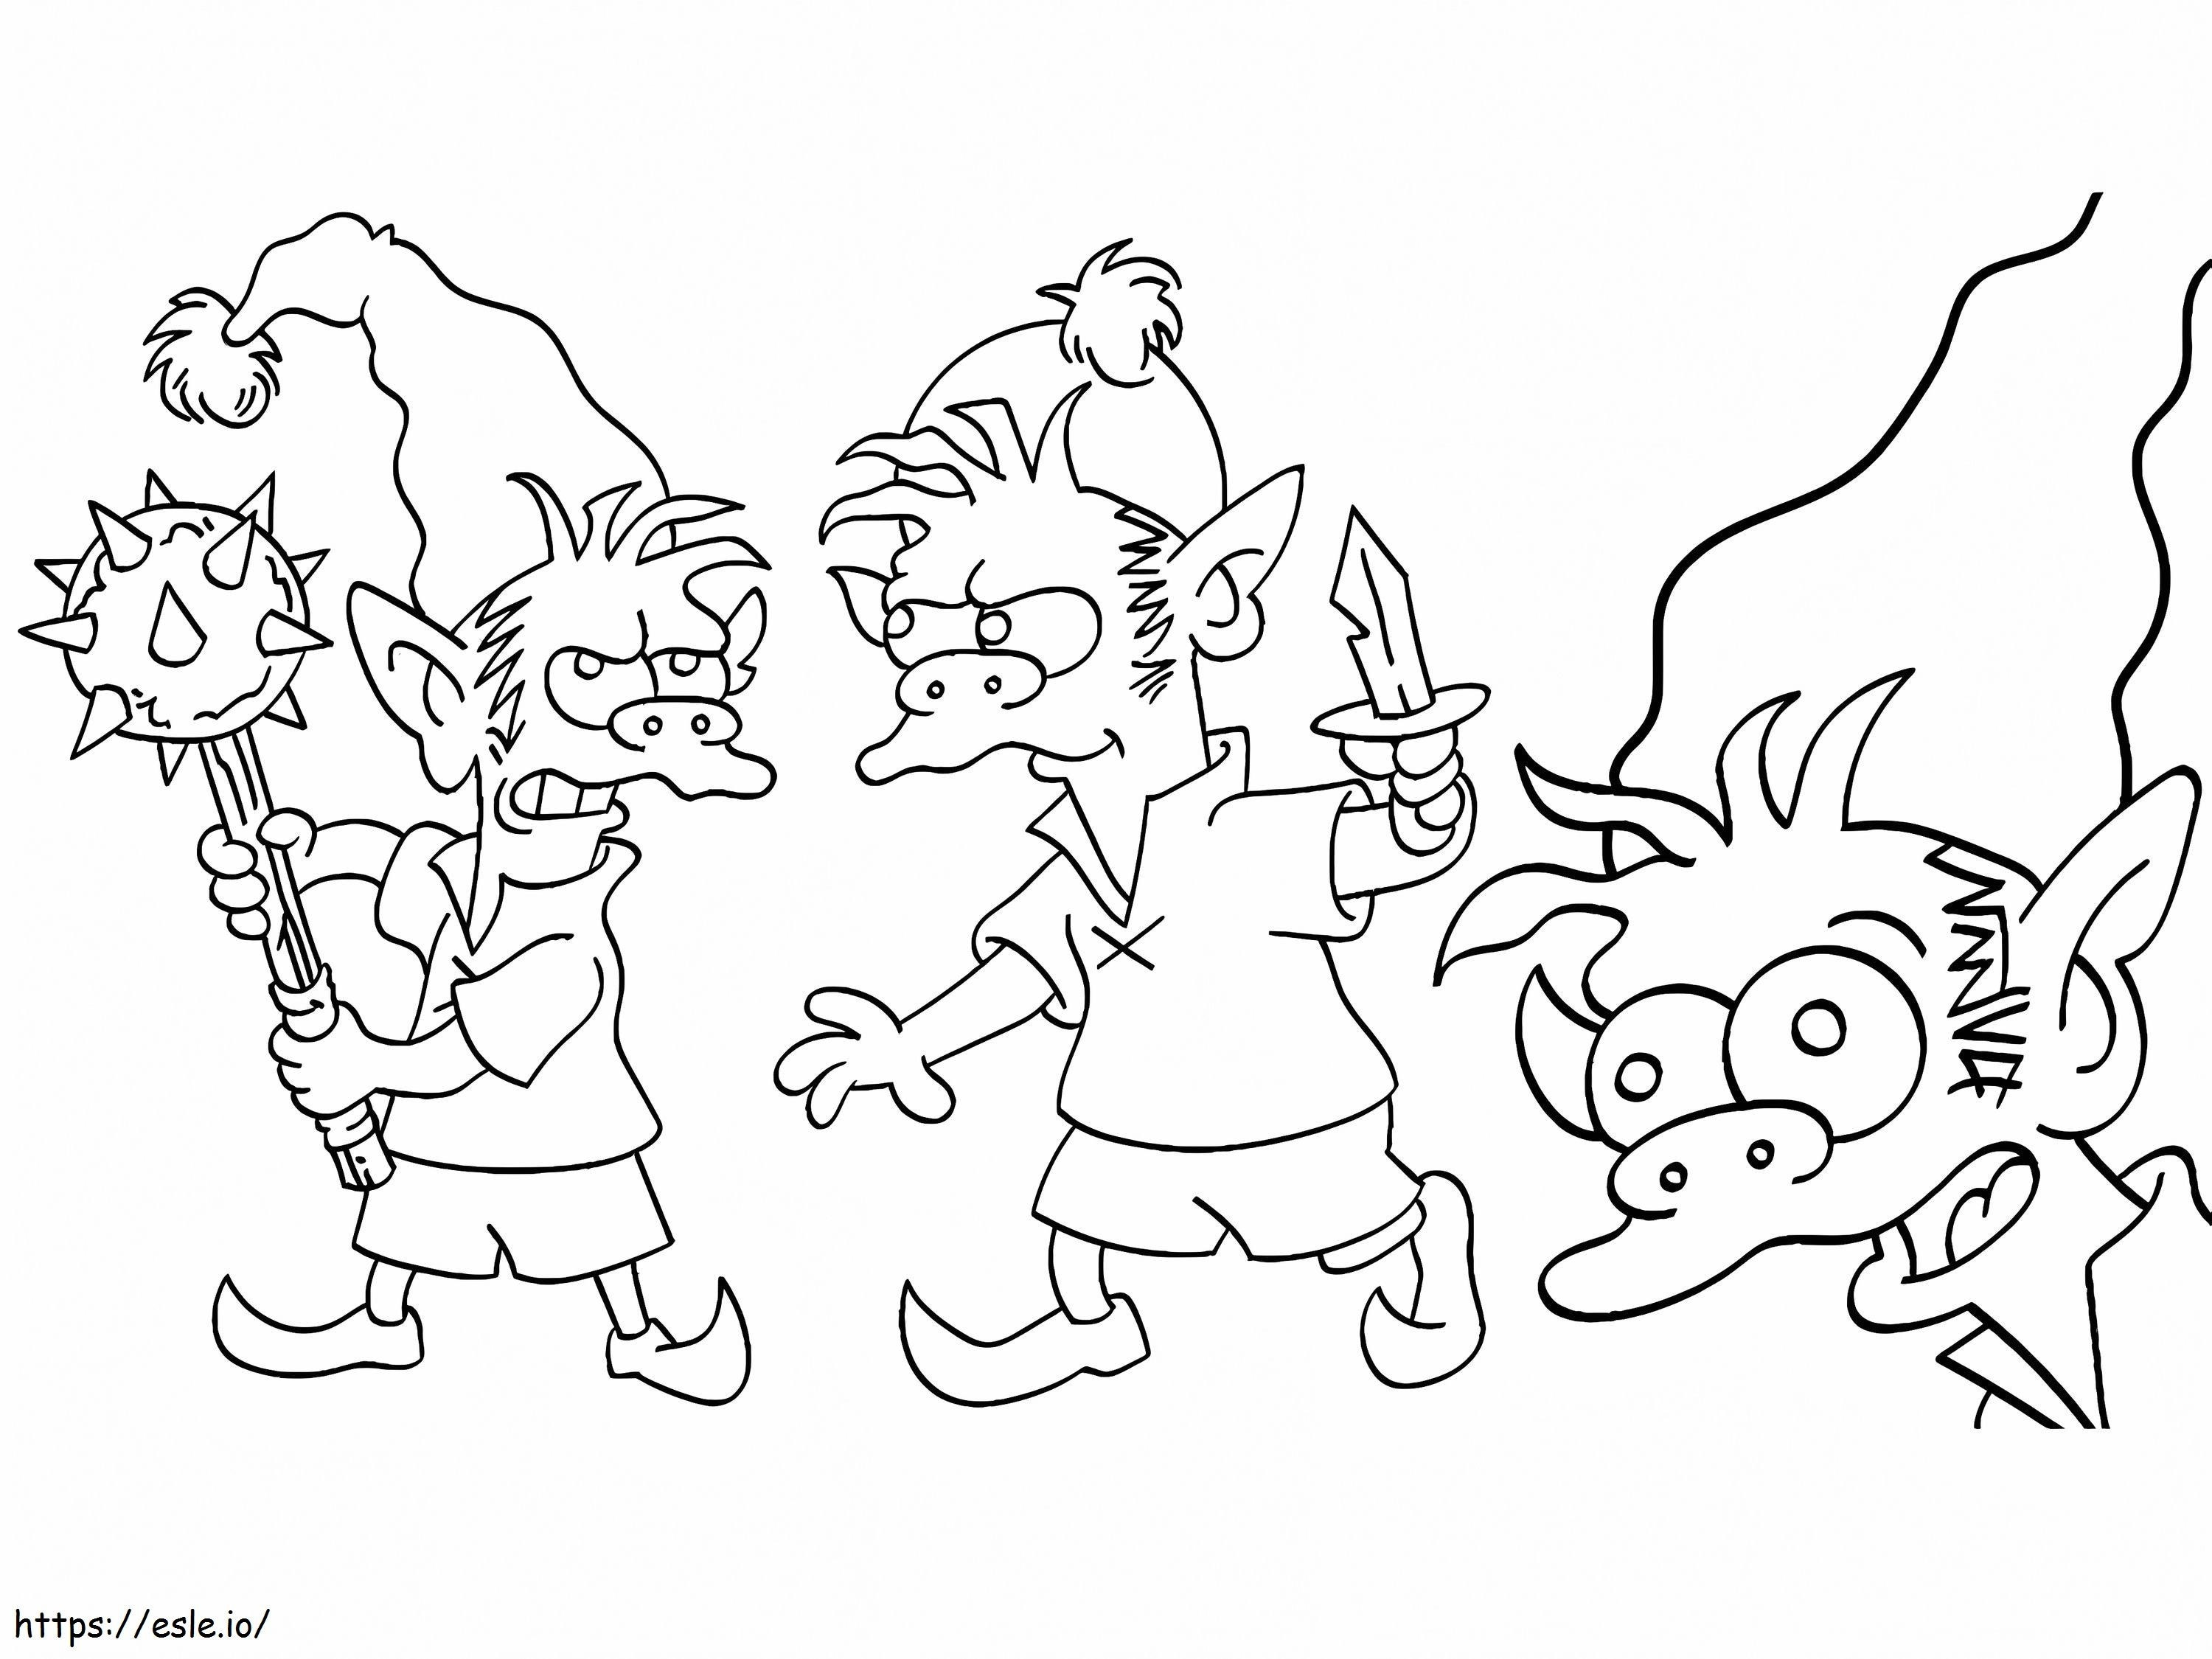 Elfo In Disenchantment coloring page